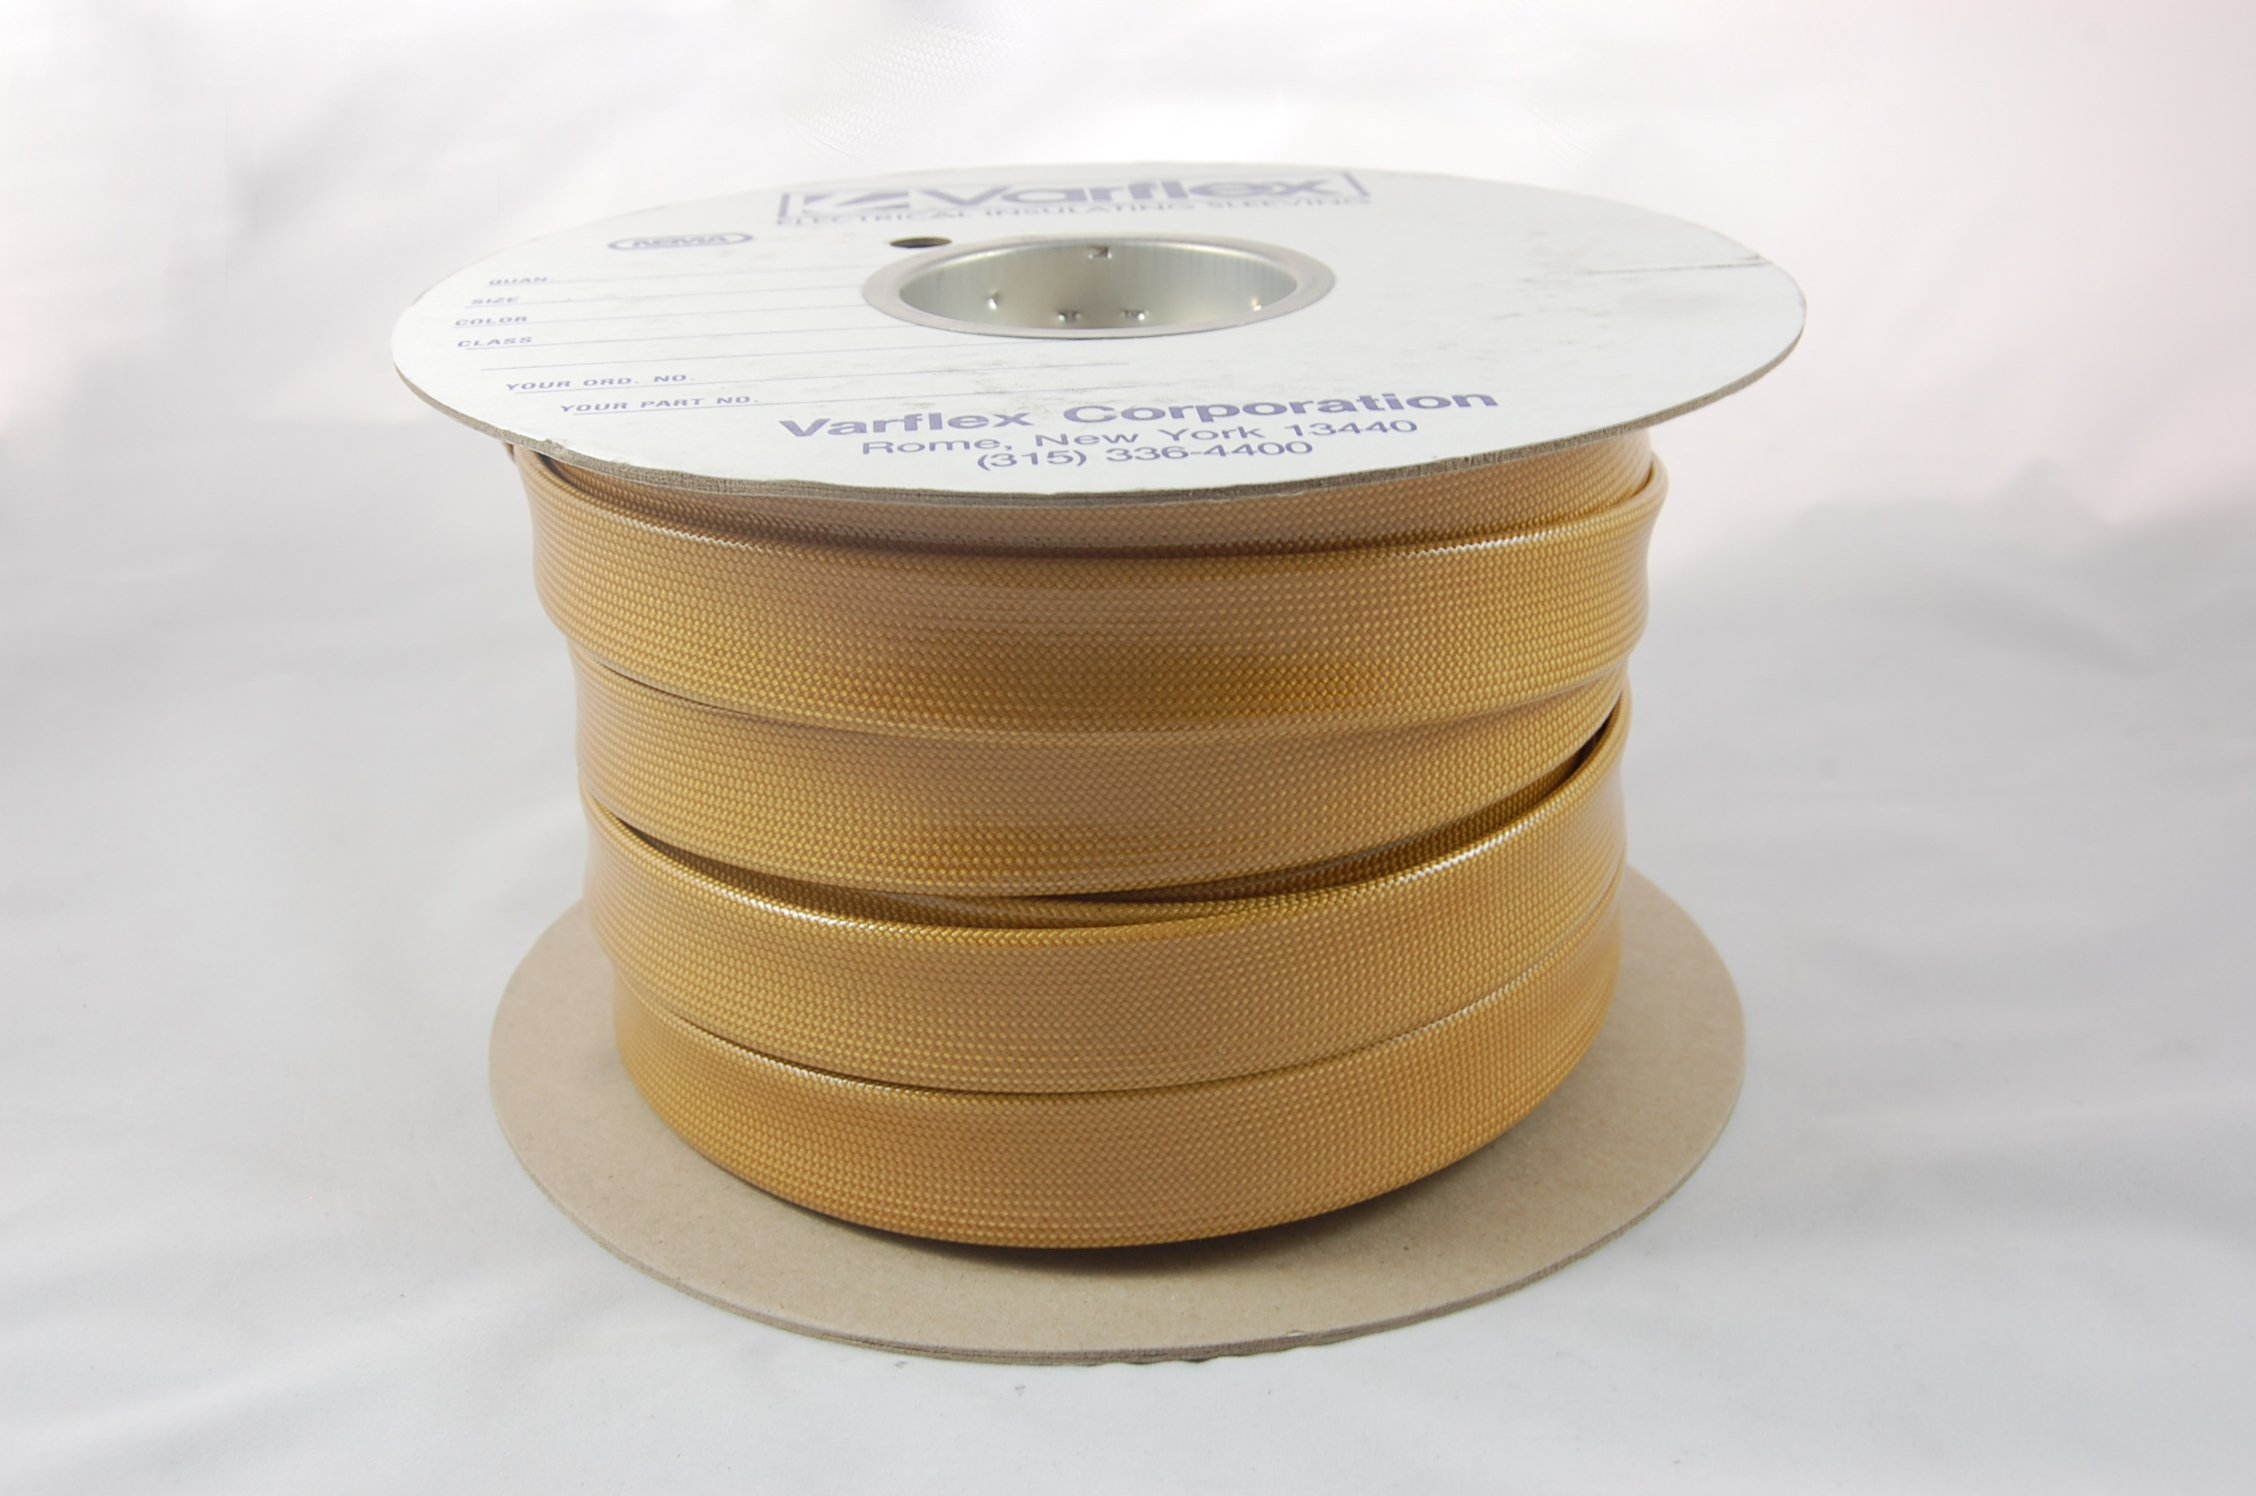 #6 AWG Varglas Silicone Resin 500 Grade H-C-1 (2500V) High Temperature Silicone Resin Coated Braided Fiberglass Sleeving 200°C, natural, 150 FT per spool